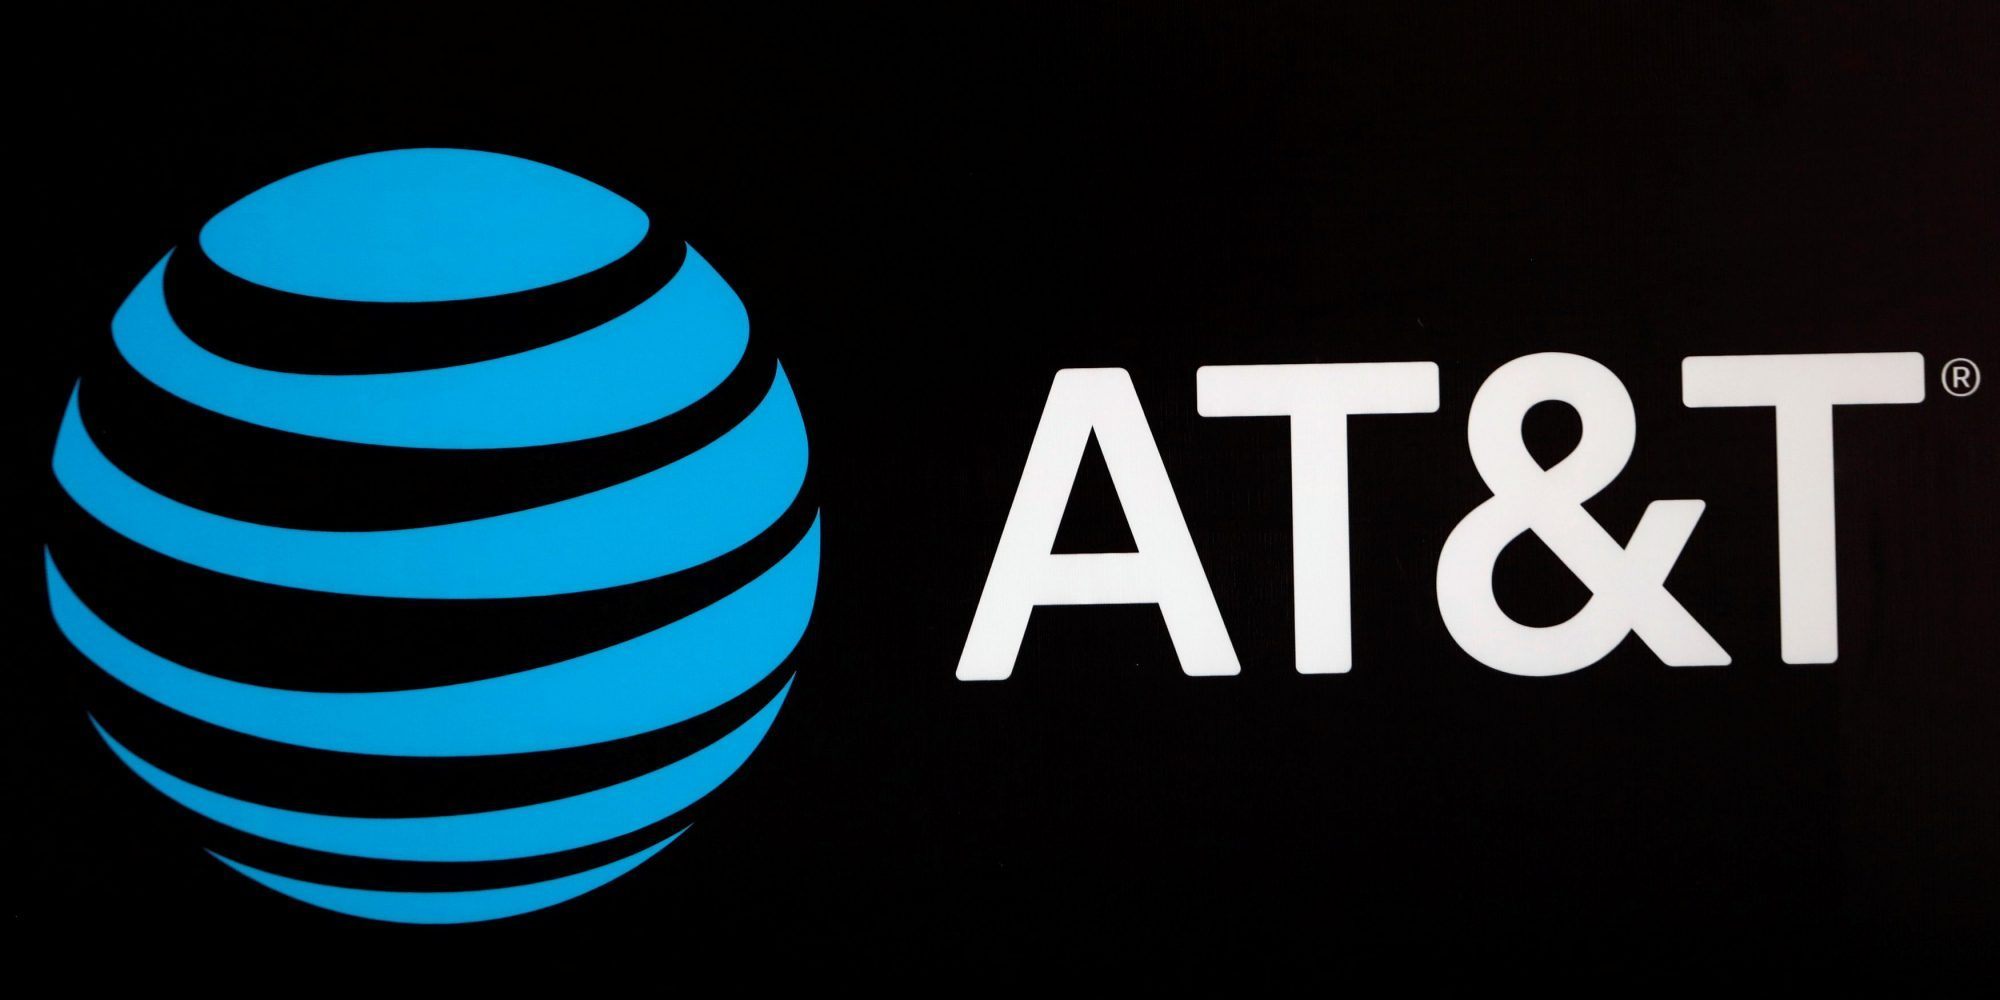 AT&T Makes History With First Ever Space-Based Smartphone Call!